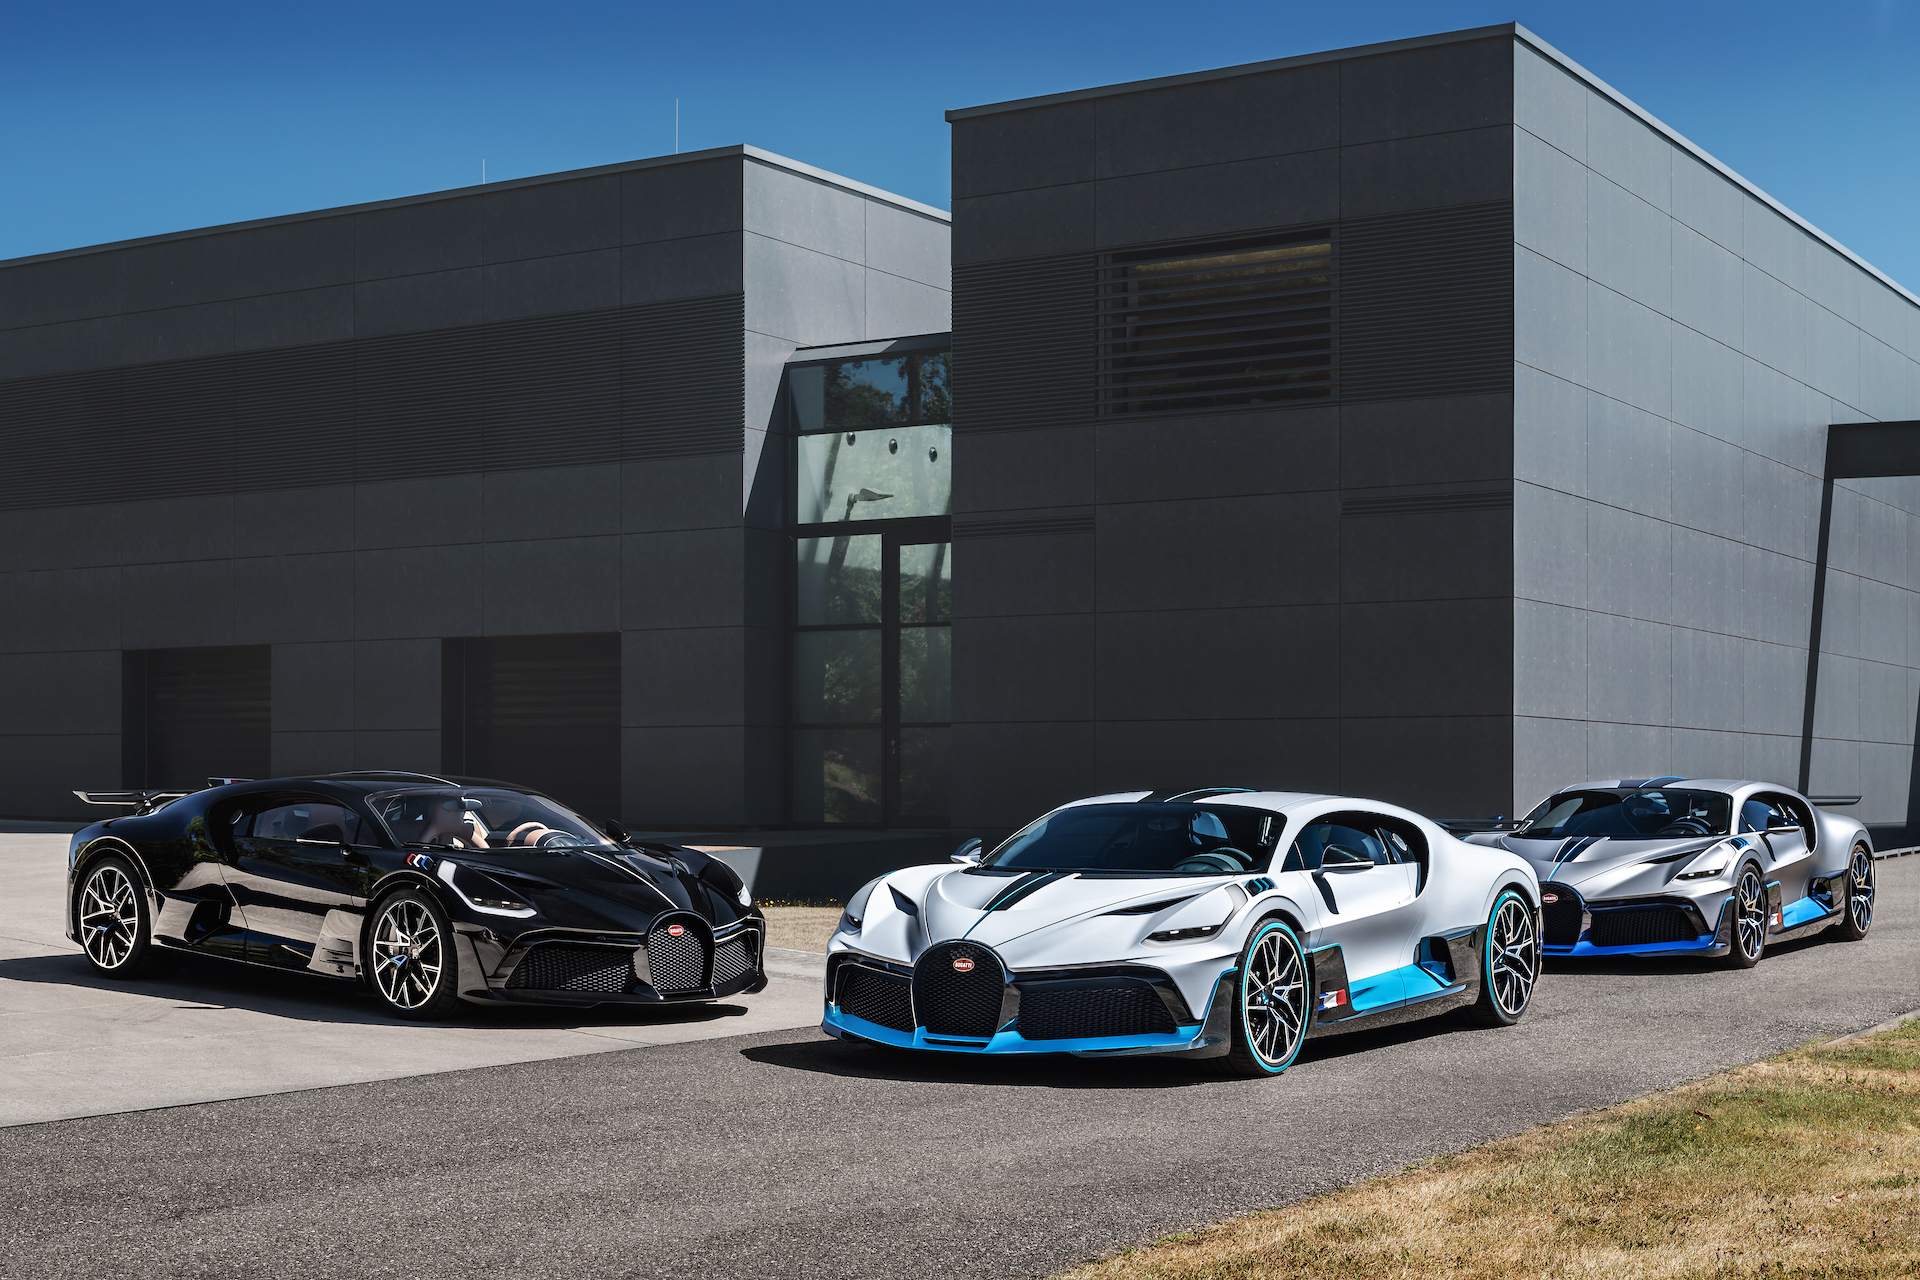 An image of a few Bugatti Divo models parked outside.